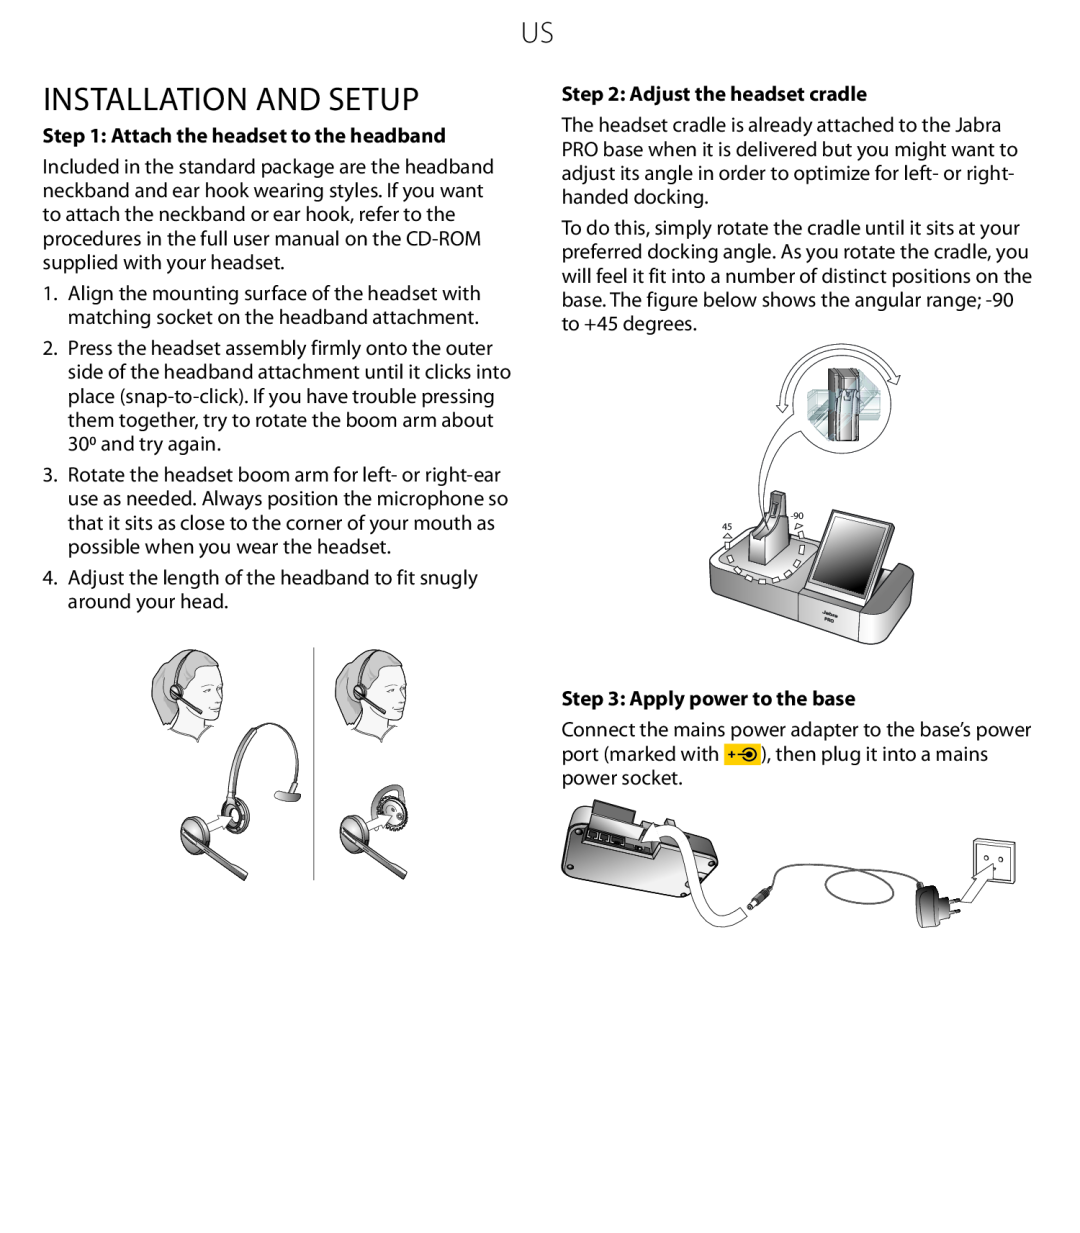 Jabra 9470 Installation and Setup, Attach the headset to the headband, Adjust the headset cradle, Apply power to the base 